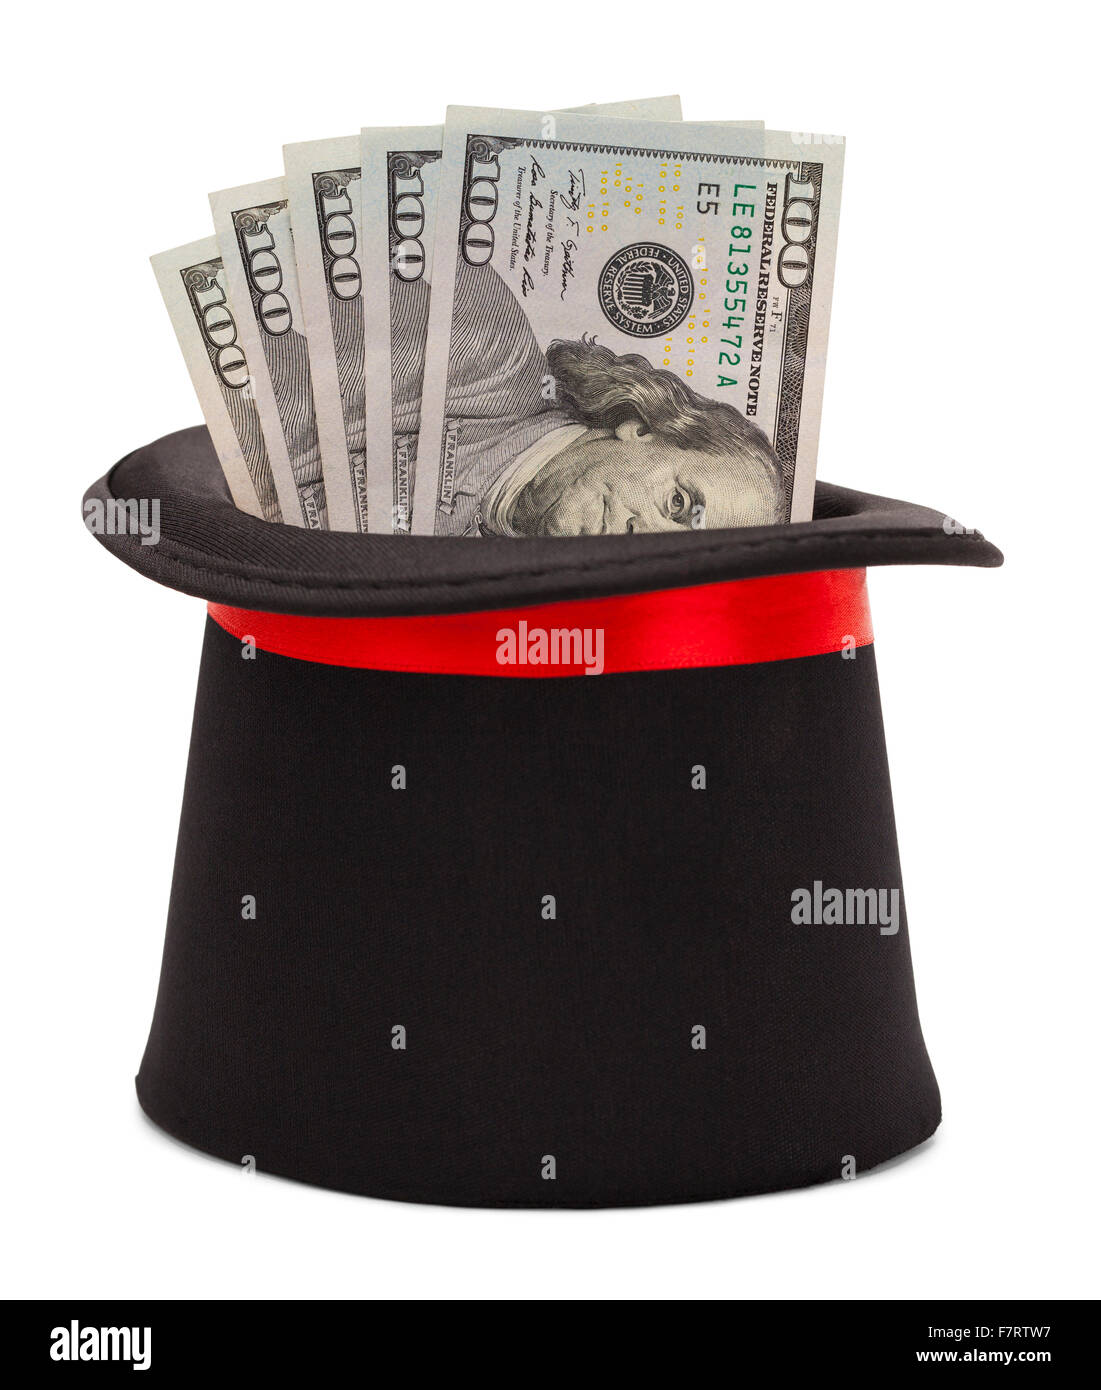 Magic Top Hat with Cash Money Coming Out Isolated on White Background. Stock Photo